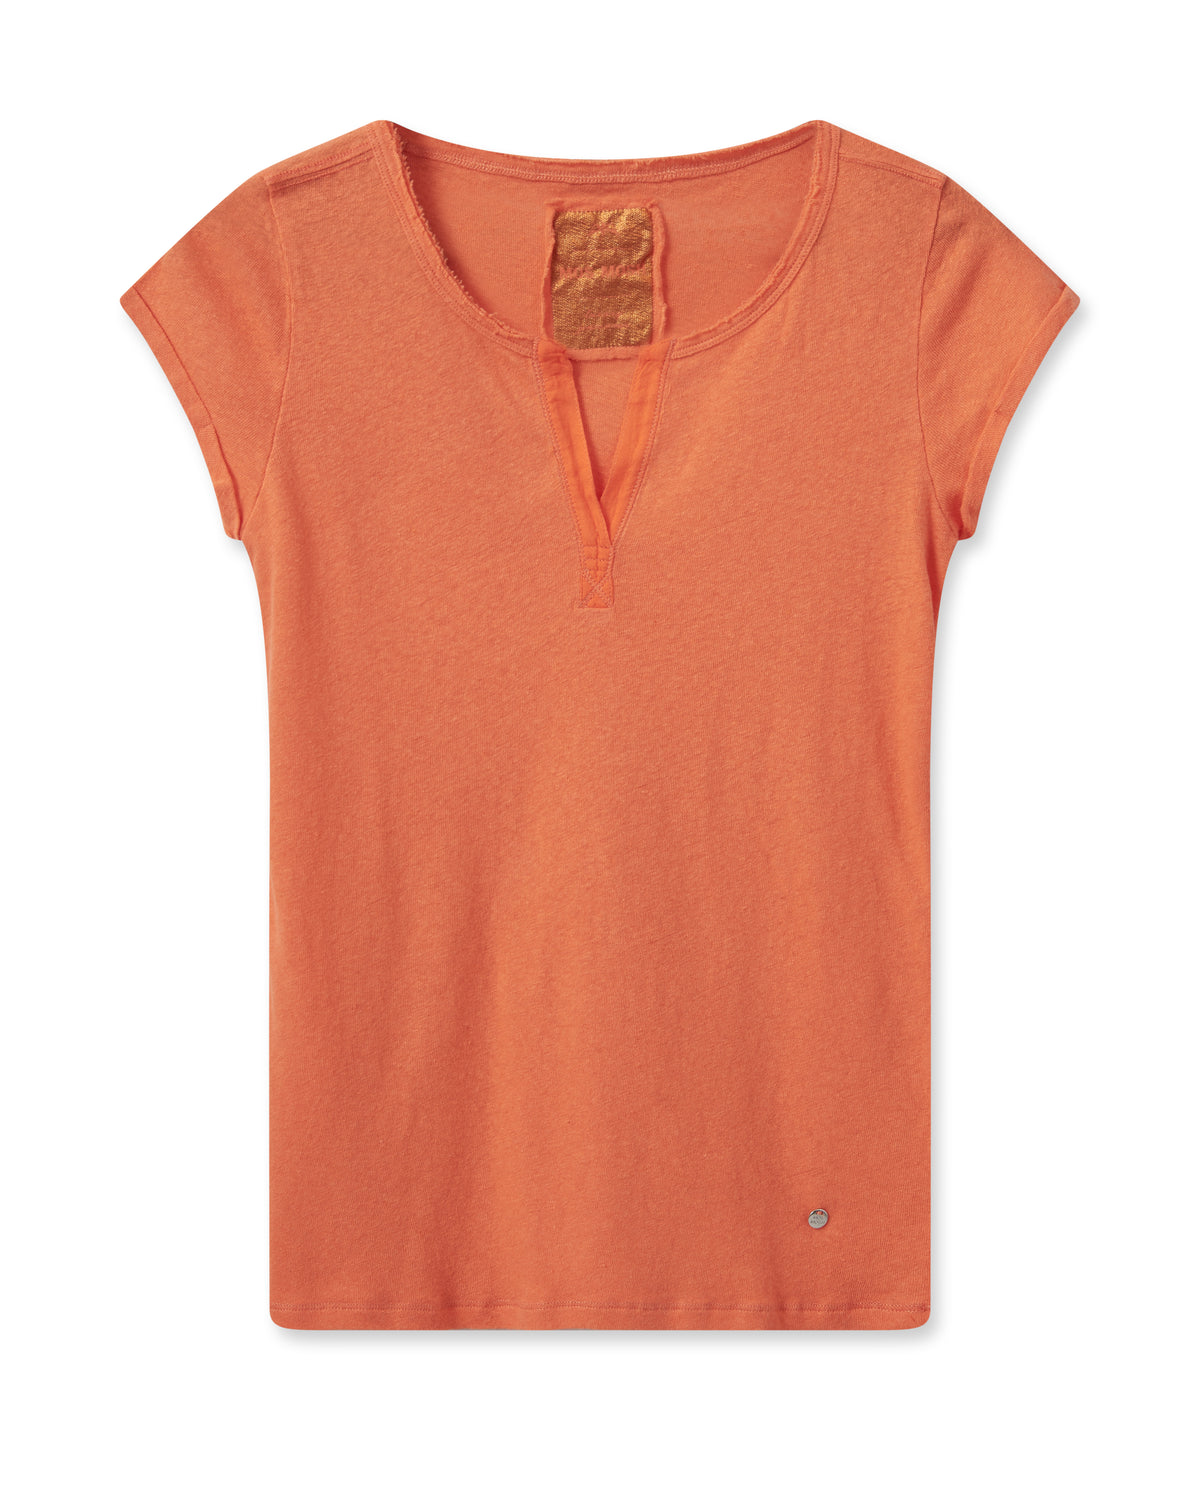 hot orange linen blend tee with a notch neck and short sleeves